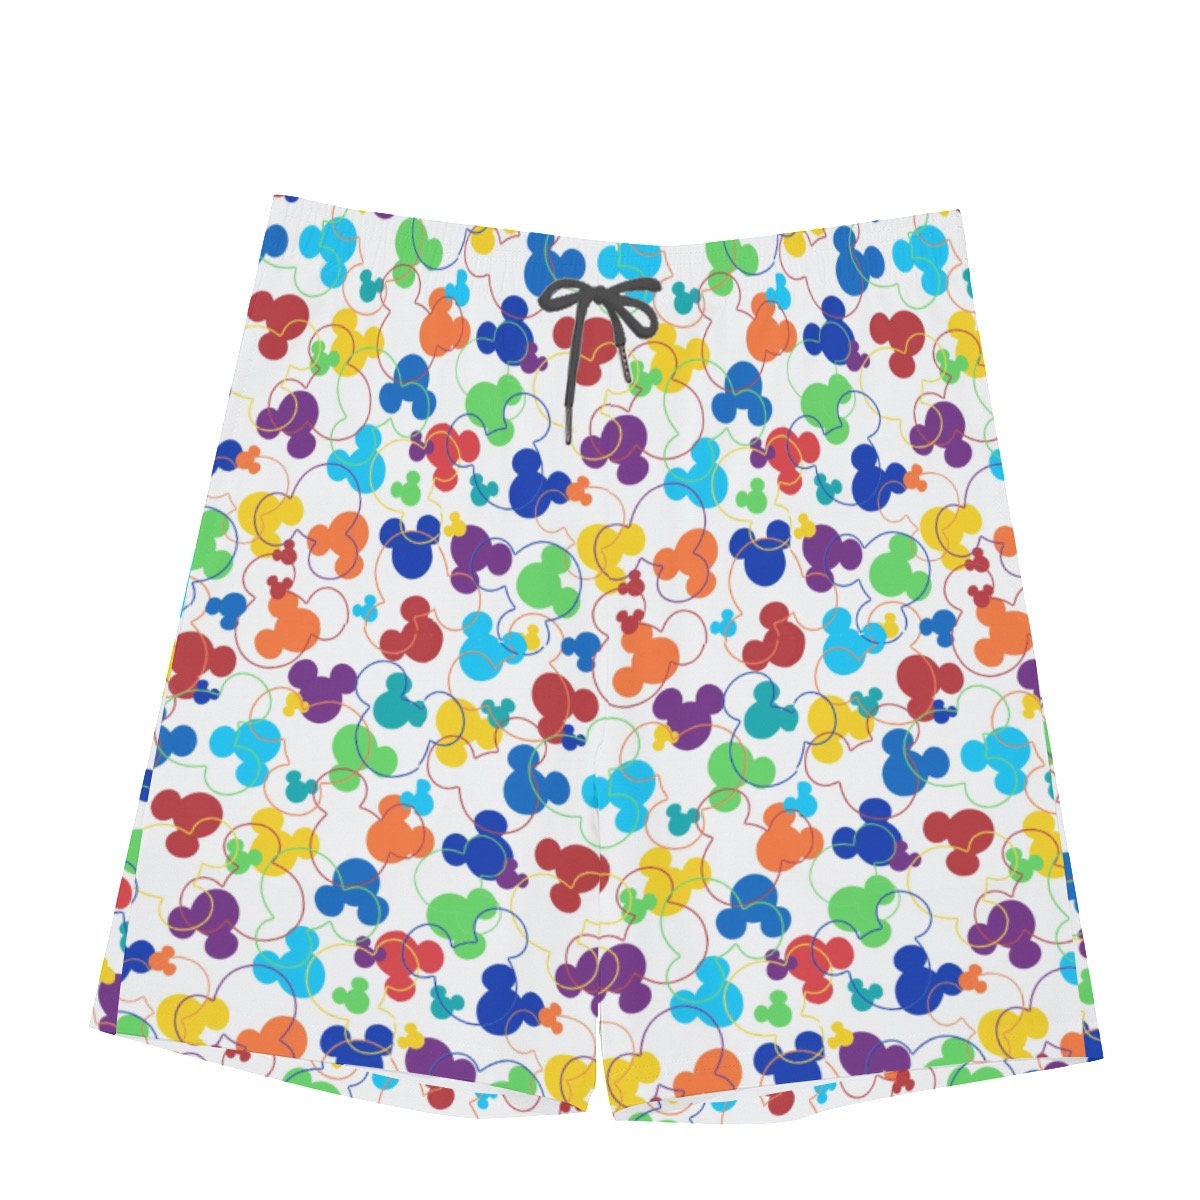 Disney Mickey Multicolor Rainbow Men's Beach Shorts , trunks - Add Fun and Color to Your Beach Look